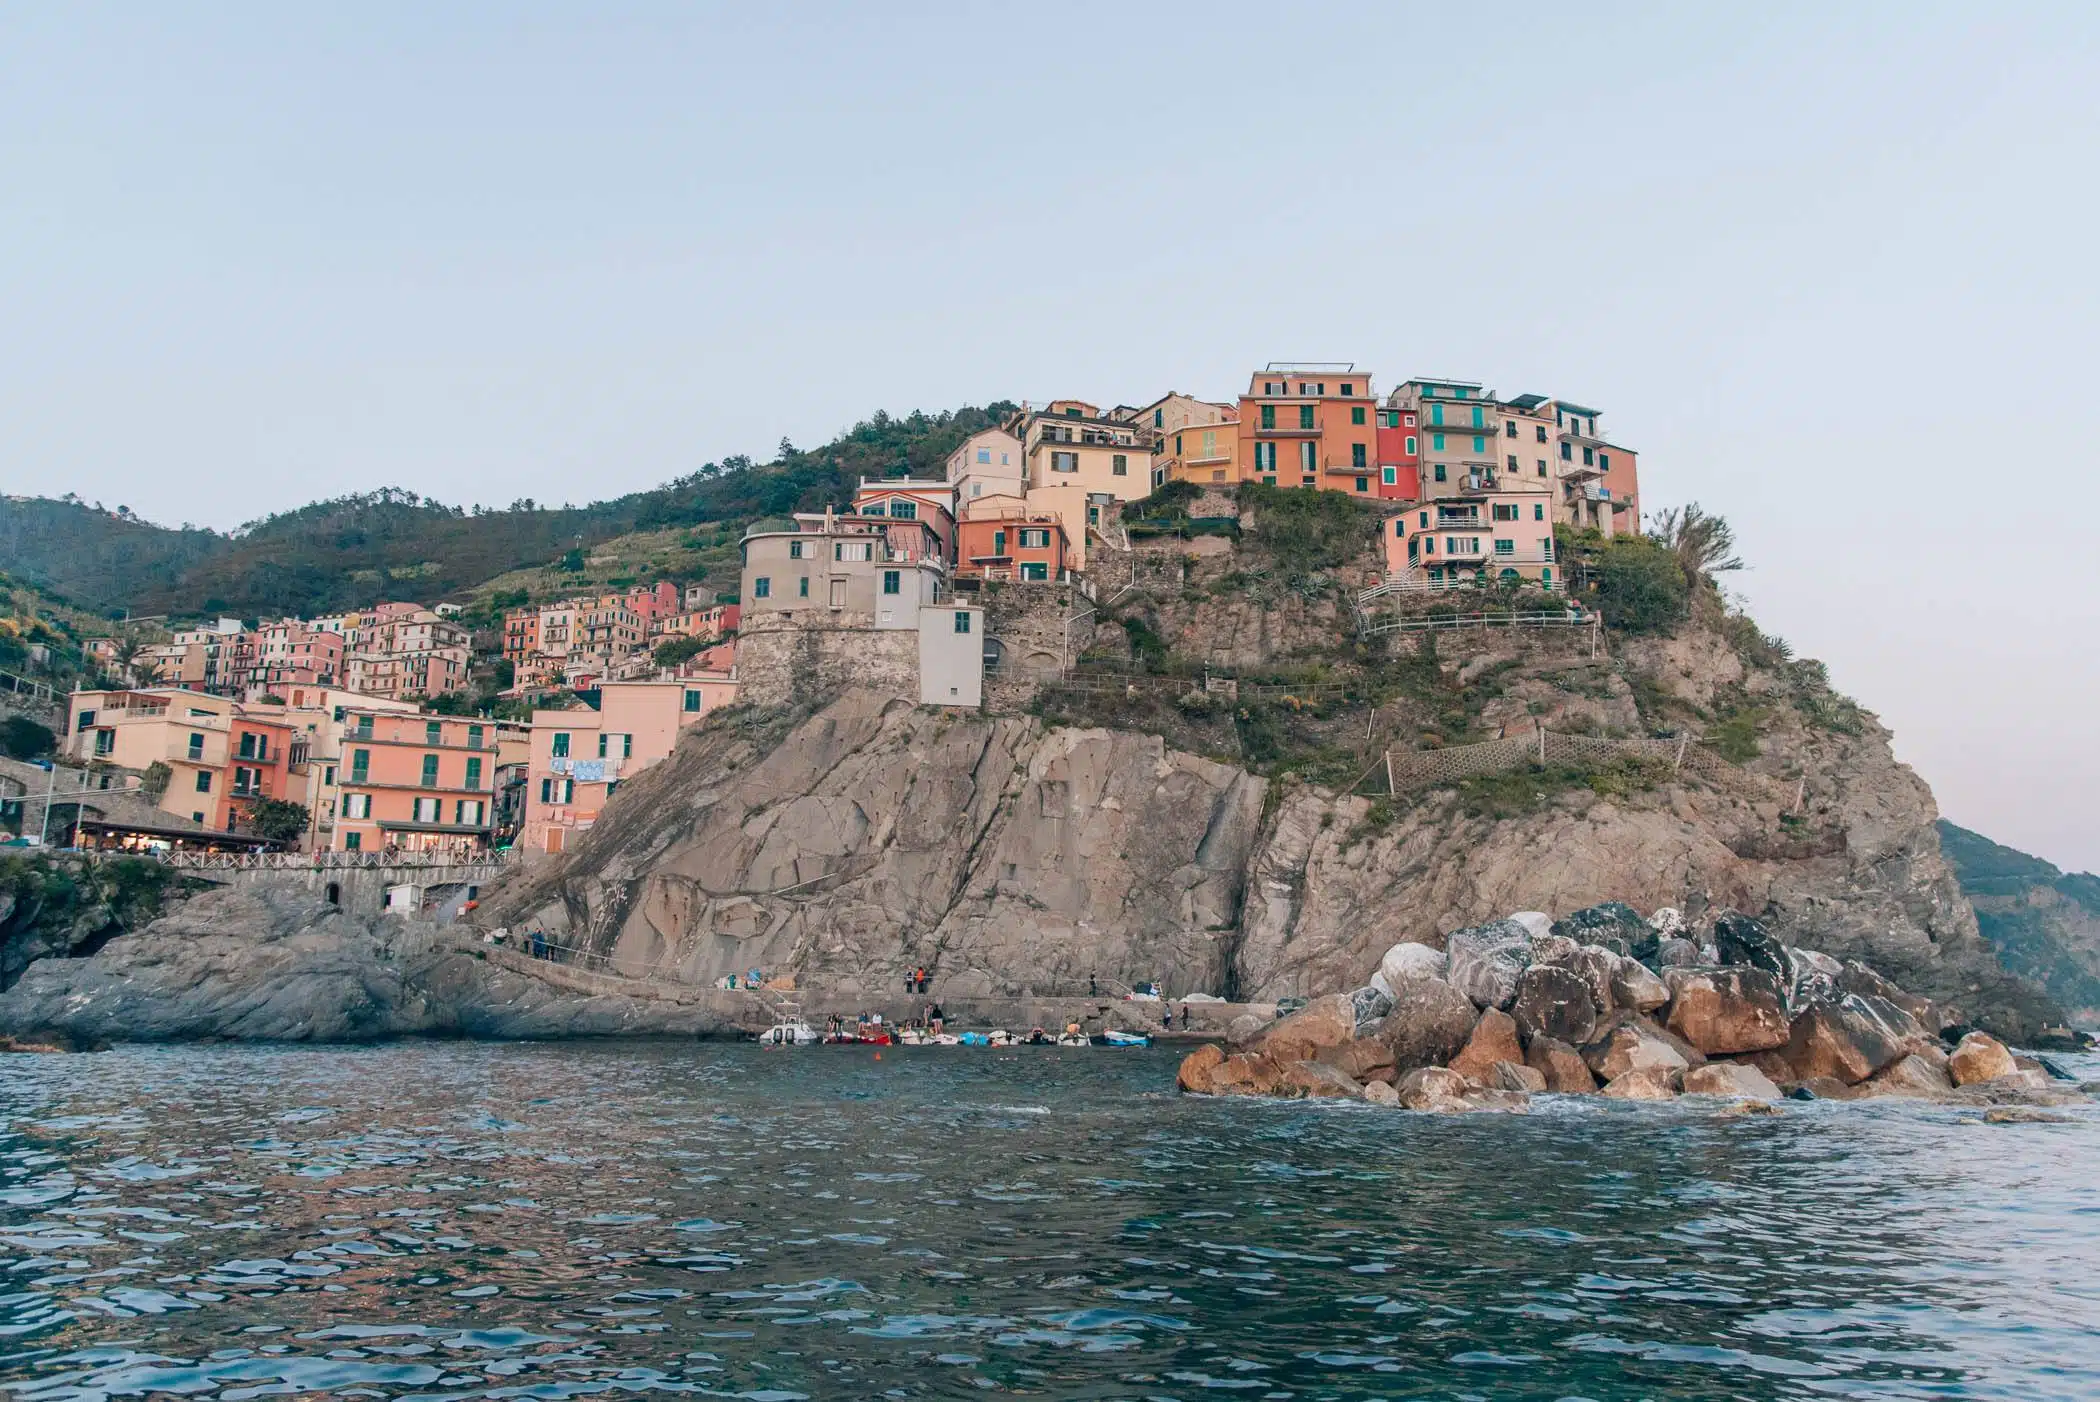 Cinque Terre Itinerary, by travel blogger What The Fab